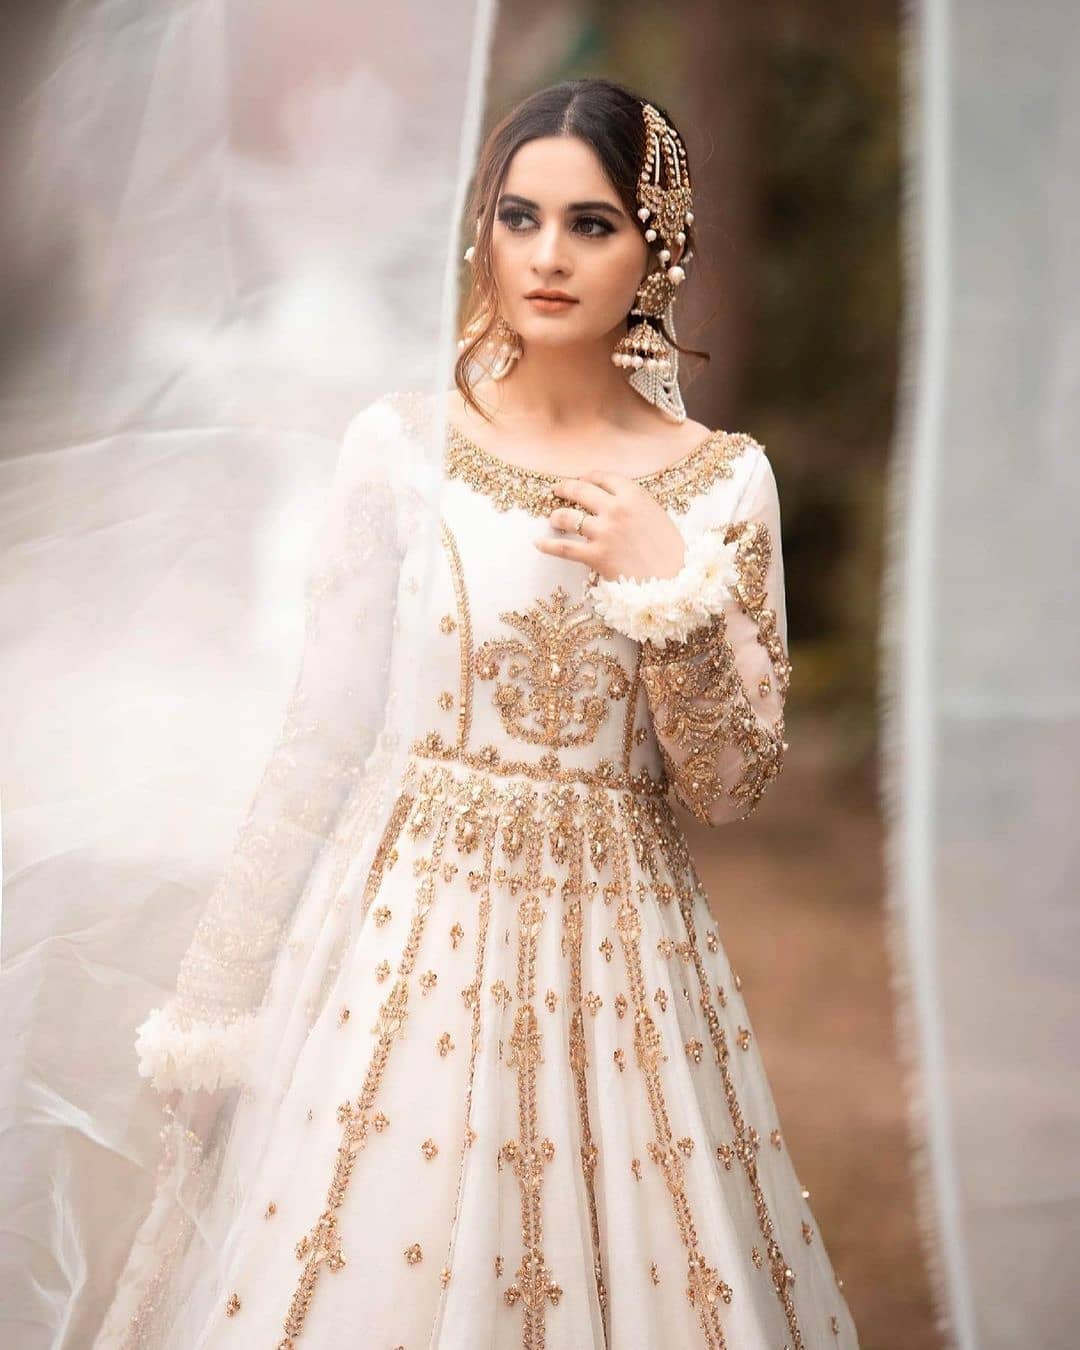 Aiman Khan Looks Drop-Dead Gorgeous in Her Latest Photoshoot!